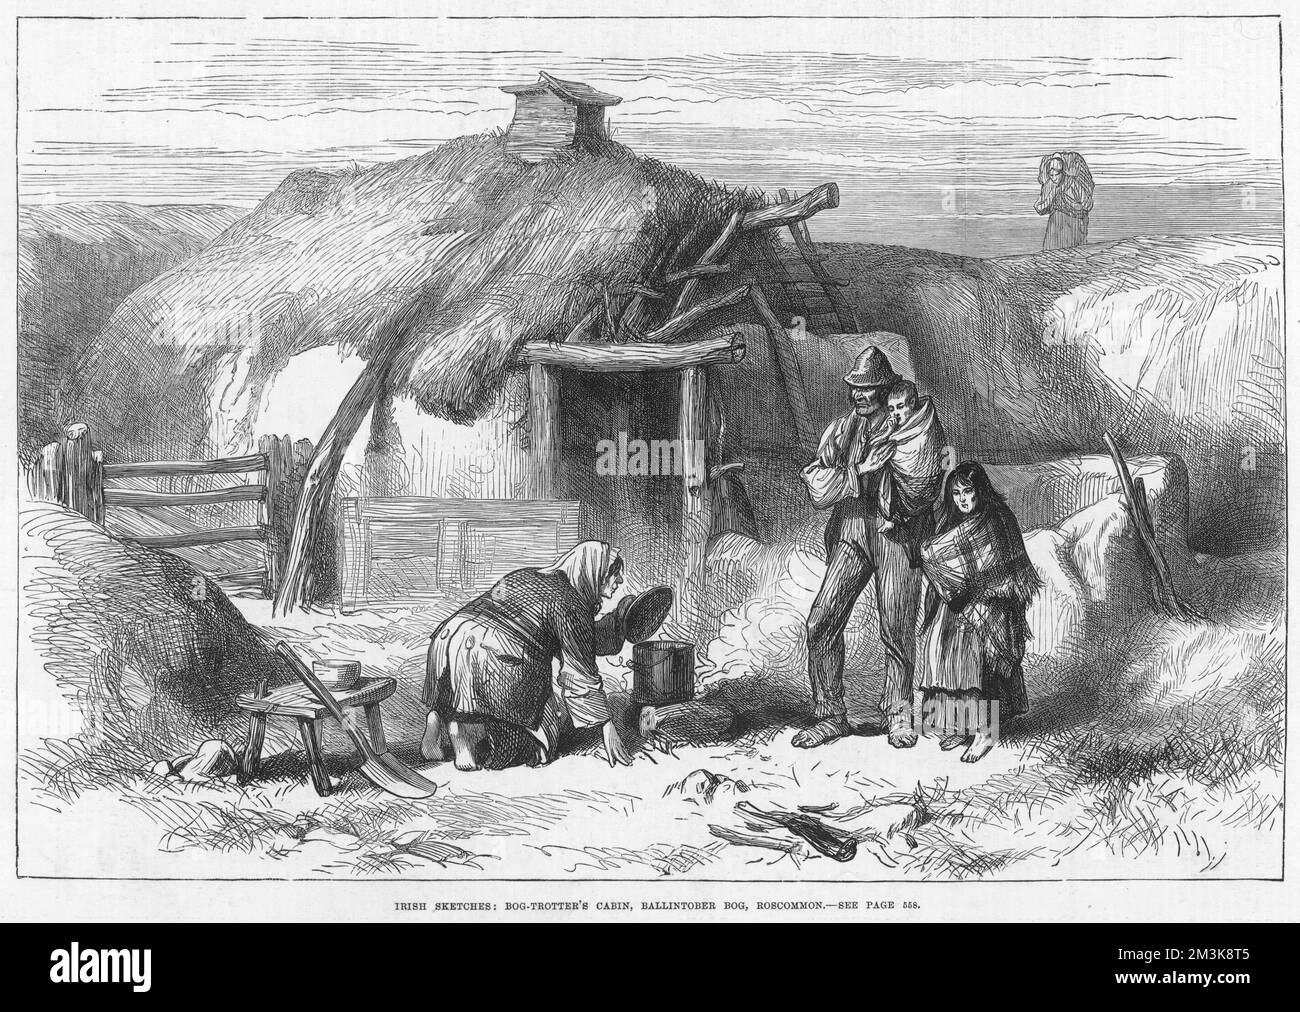 An Irish sketch depicting a  bog-trotter's cabin at  Ballintober Bog in Roscommon  in Ireland.  In the distance,  a woman appears carrying her  load of peat.     Date: 13 December 1879 Stock Photo